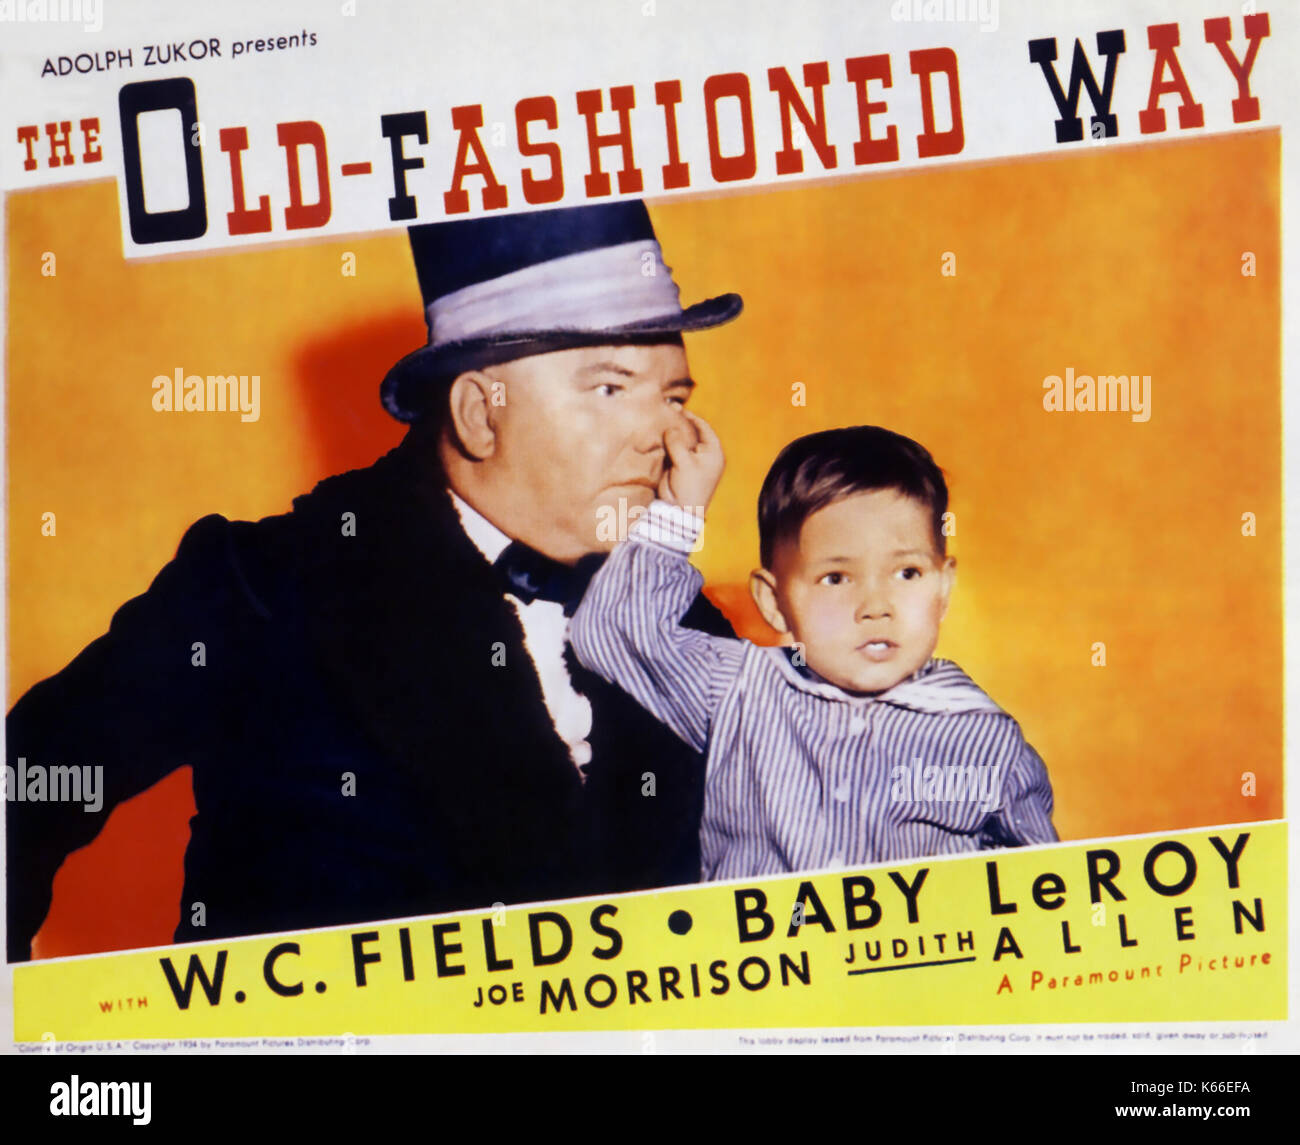 Il film OLKD FASHED WAY 1934 Paramount Pictures con W.C. Campi e Baby Leroy Foto Stock